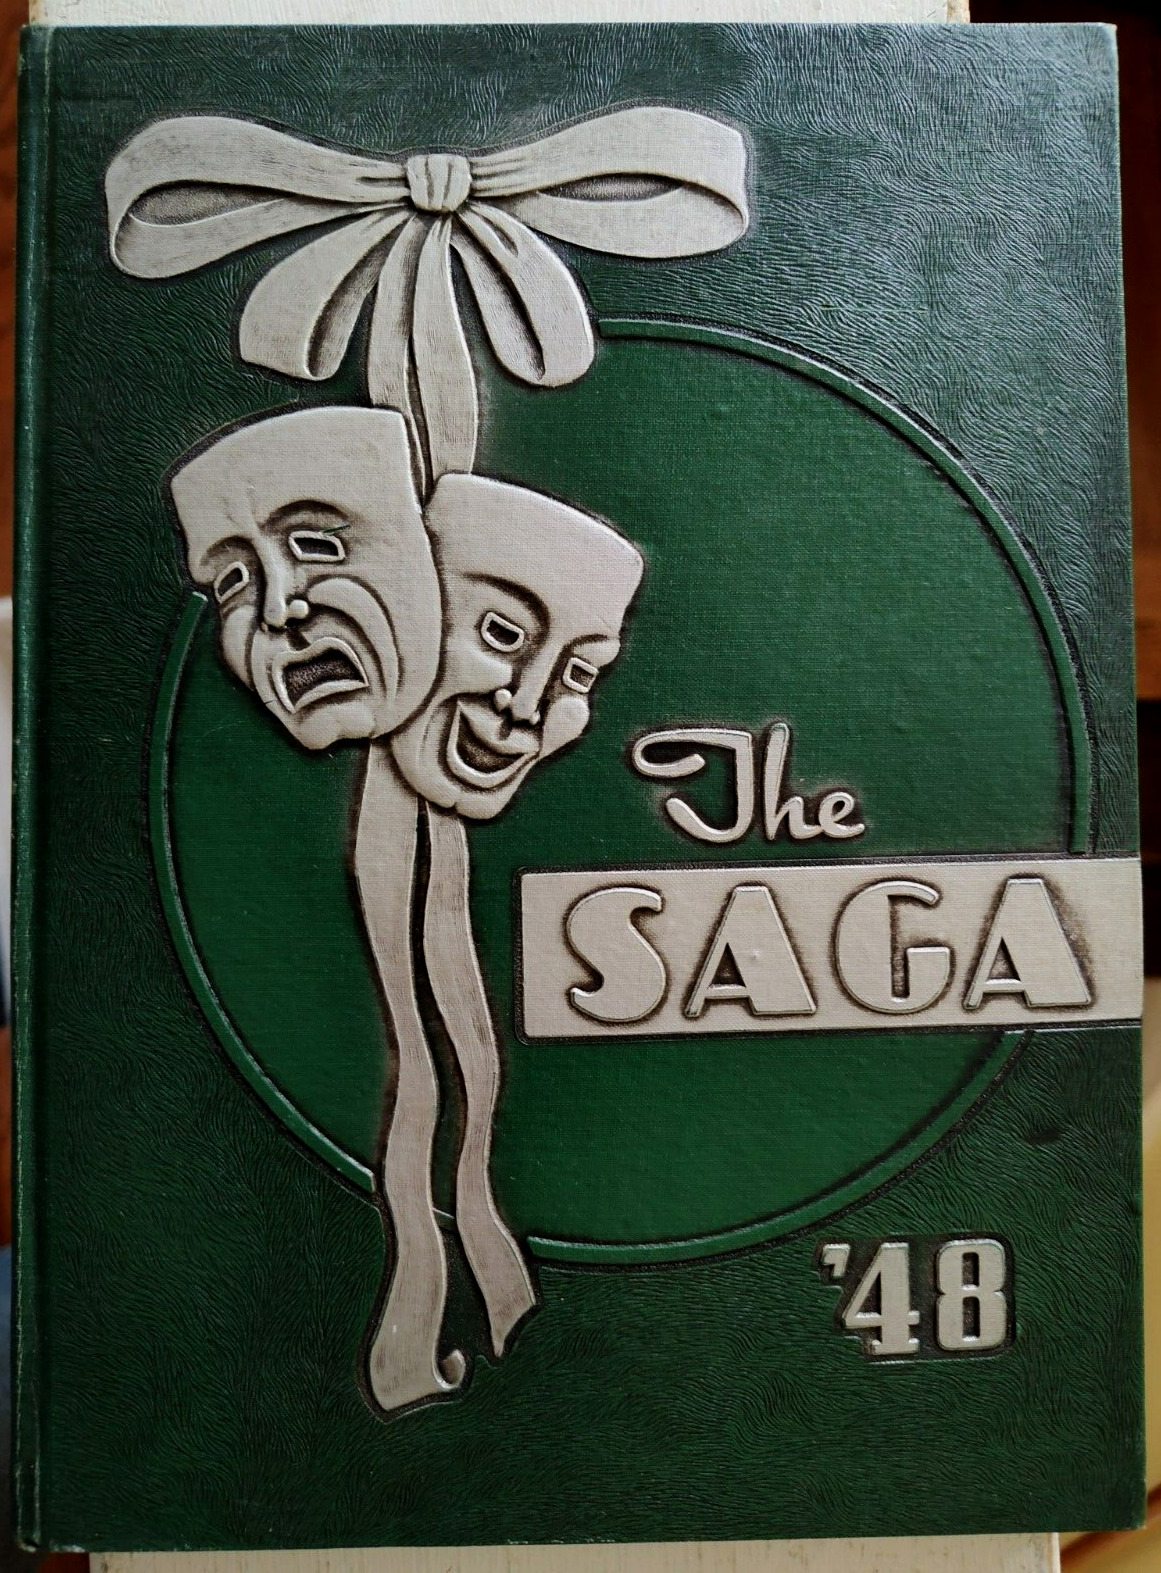 1948 Clarence NY Parker High School Yearbook - SAGA / Photos